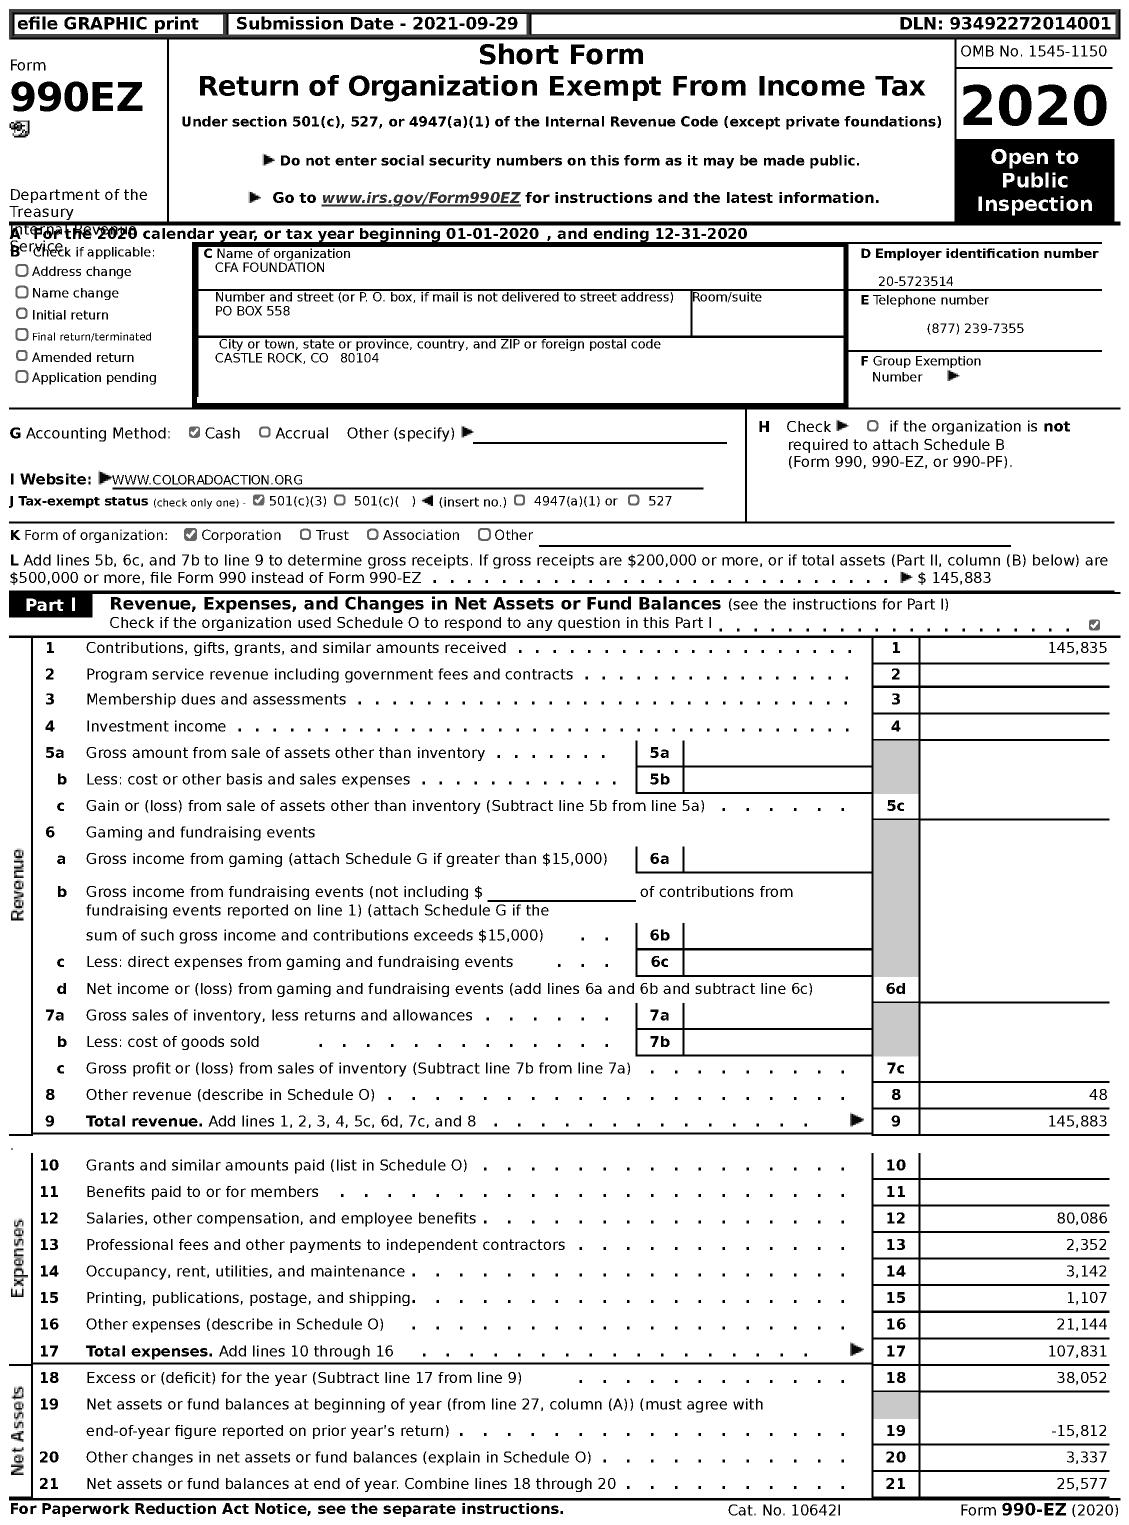 Image of first page of 2020 Form 990EZ for Cfa Foundation